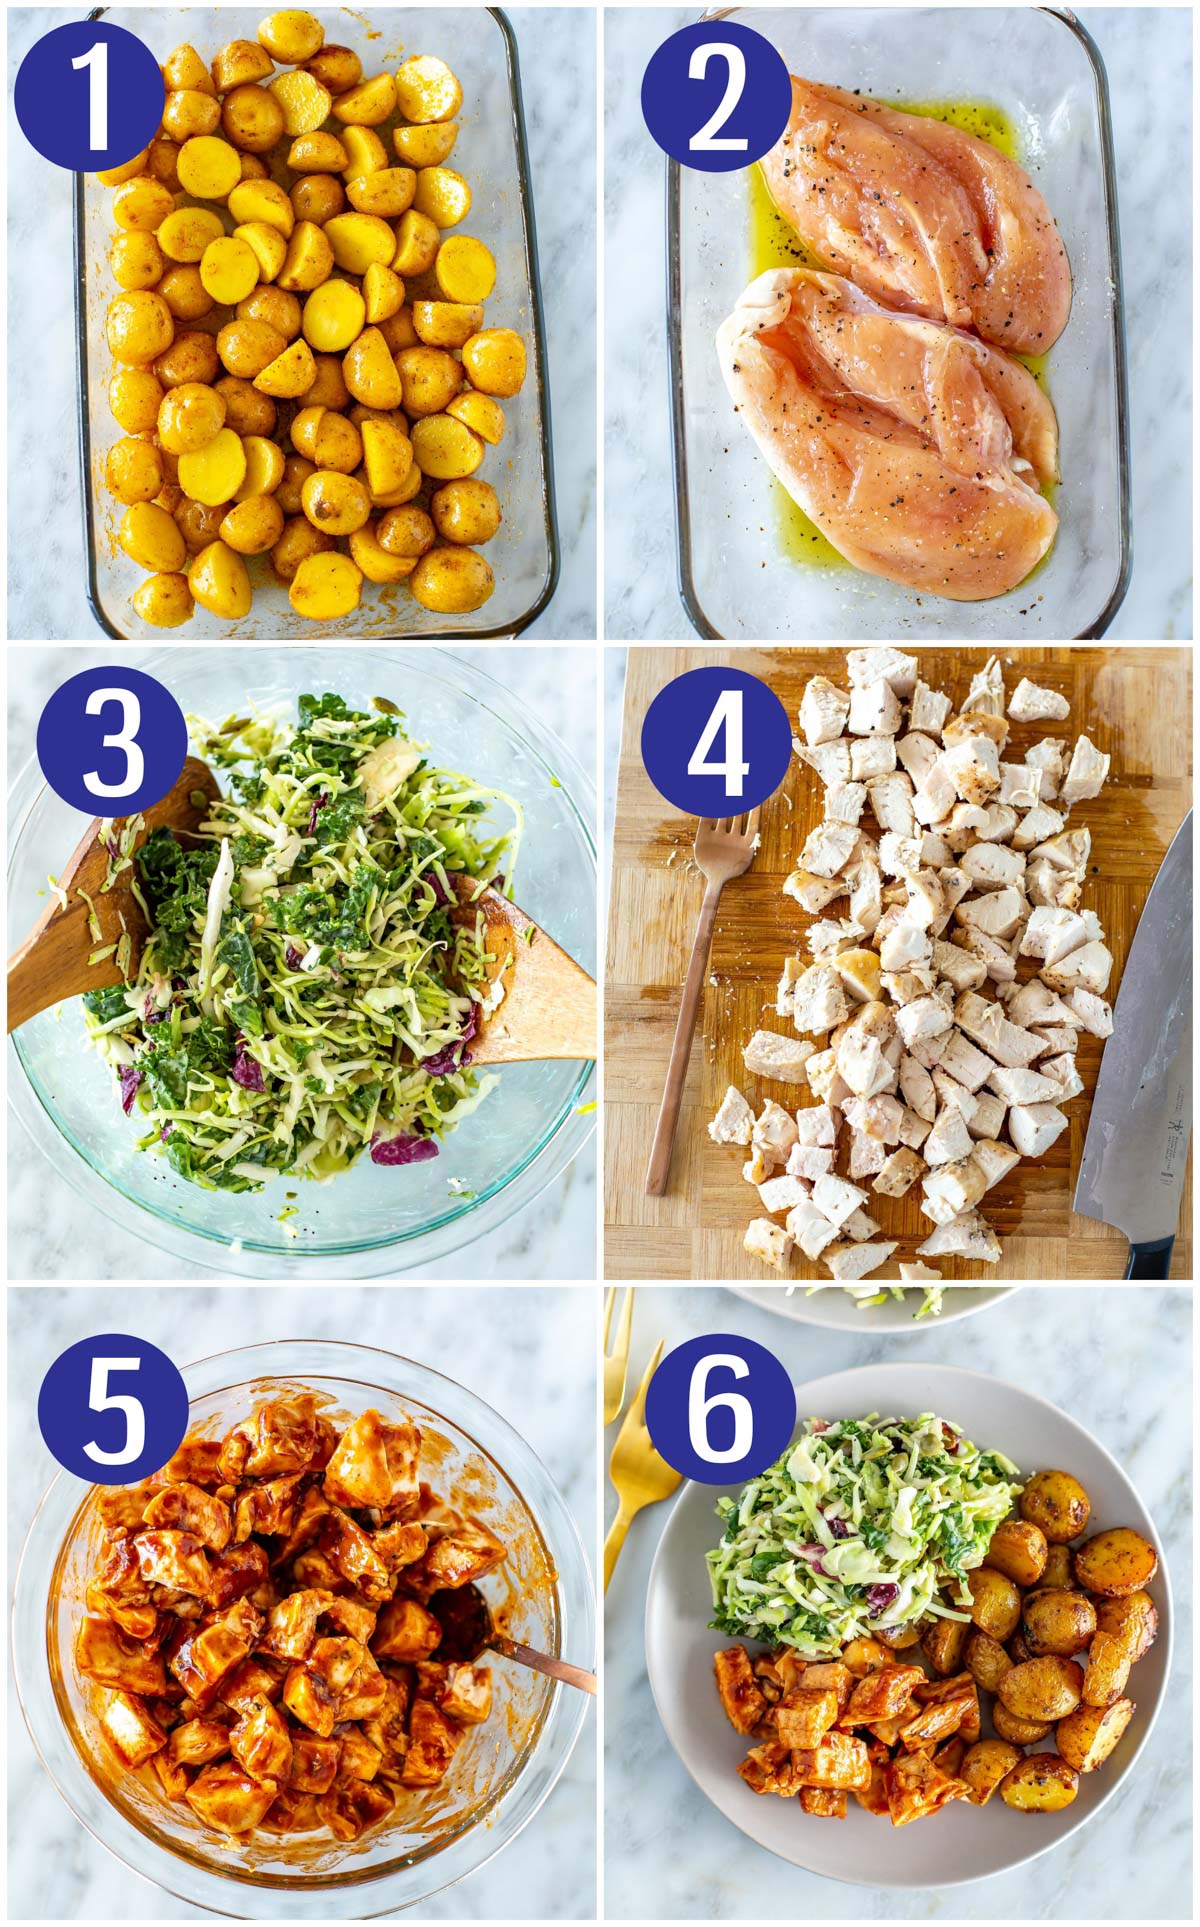 Step-by-step instructions collage for baked BBQ chicken meal prep: Roast potatoes, cook chicken, make kale salad, cut up chicken, coat in BBQ sauce, assemble meal prep containers.